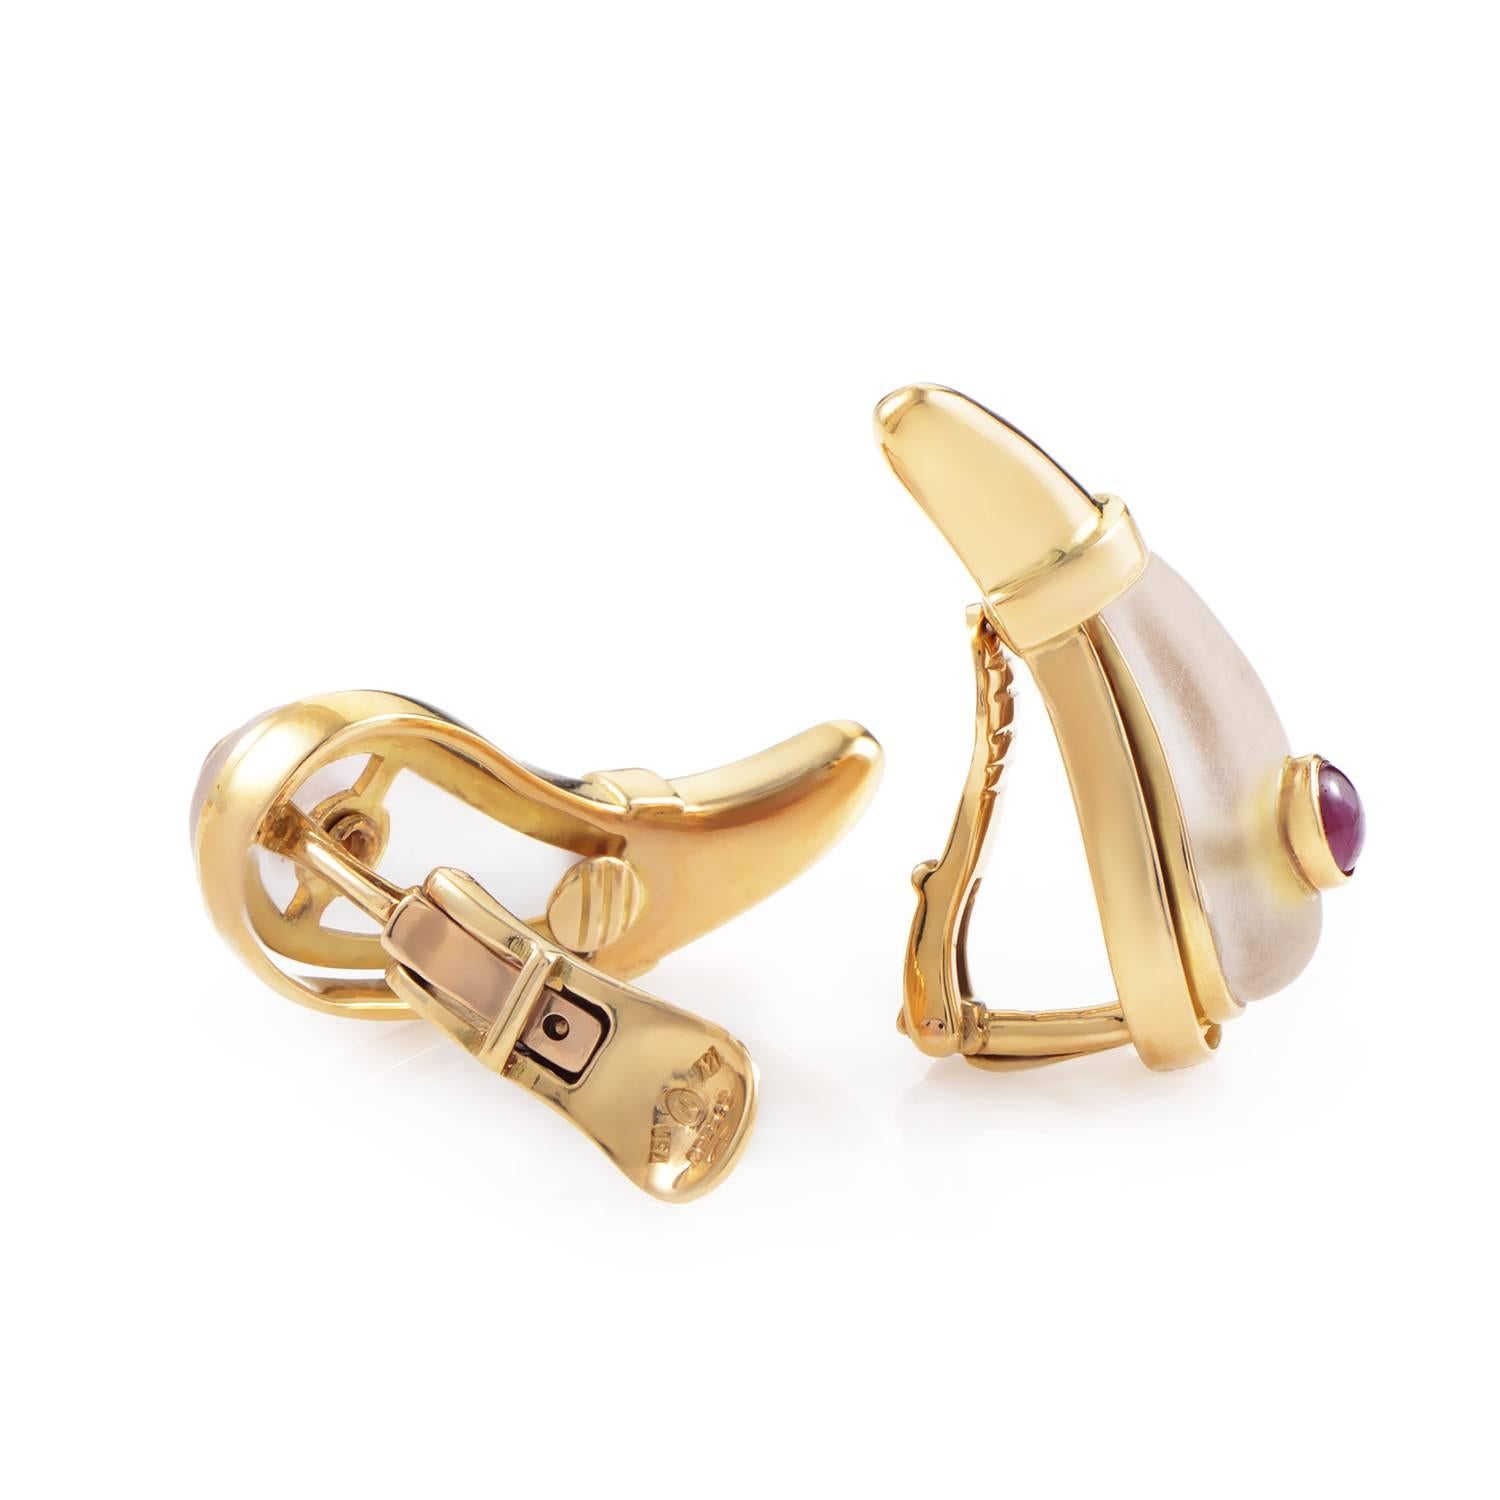 Ilias Lalaounis designs are exceptionally unique and painstakingly crafted. This pair of teardrop-shaped earrings are made of 18K yellow gold and are set with white crystal and ruby cabochons.
